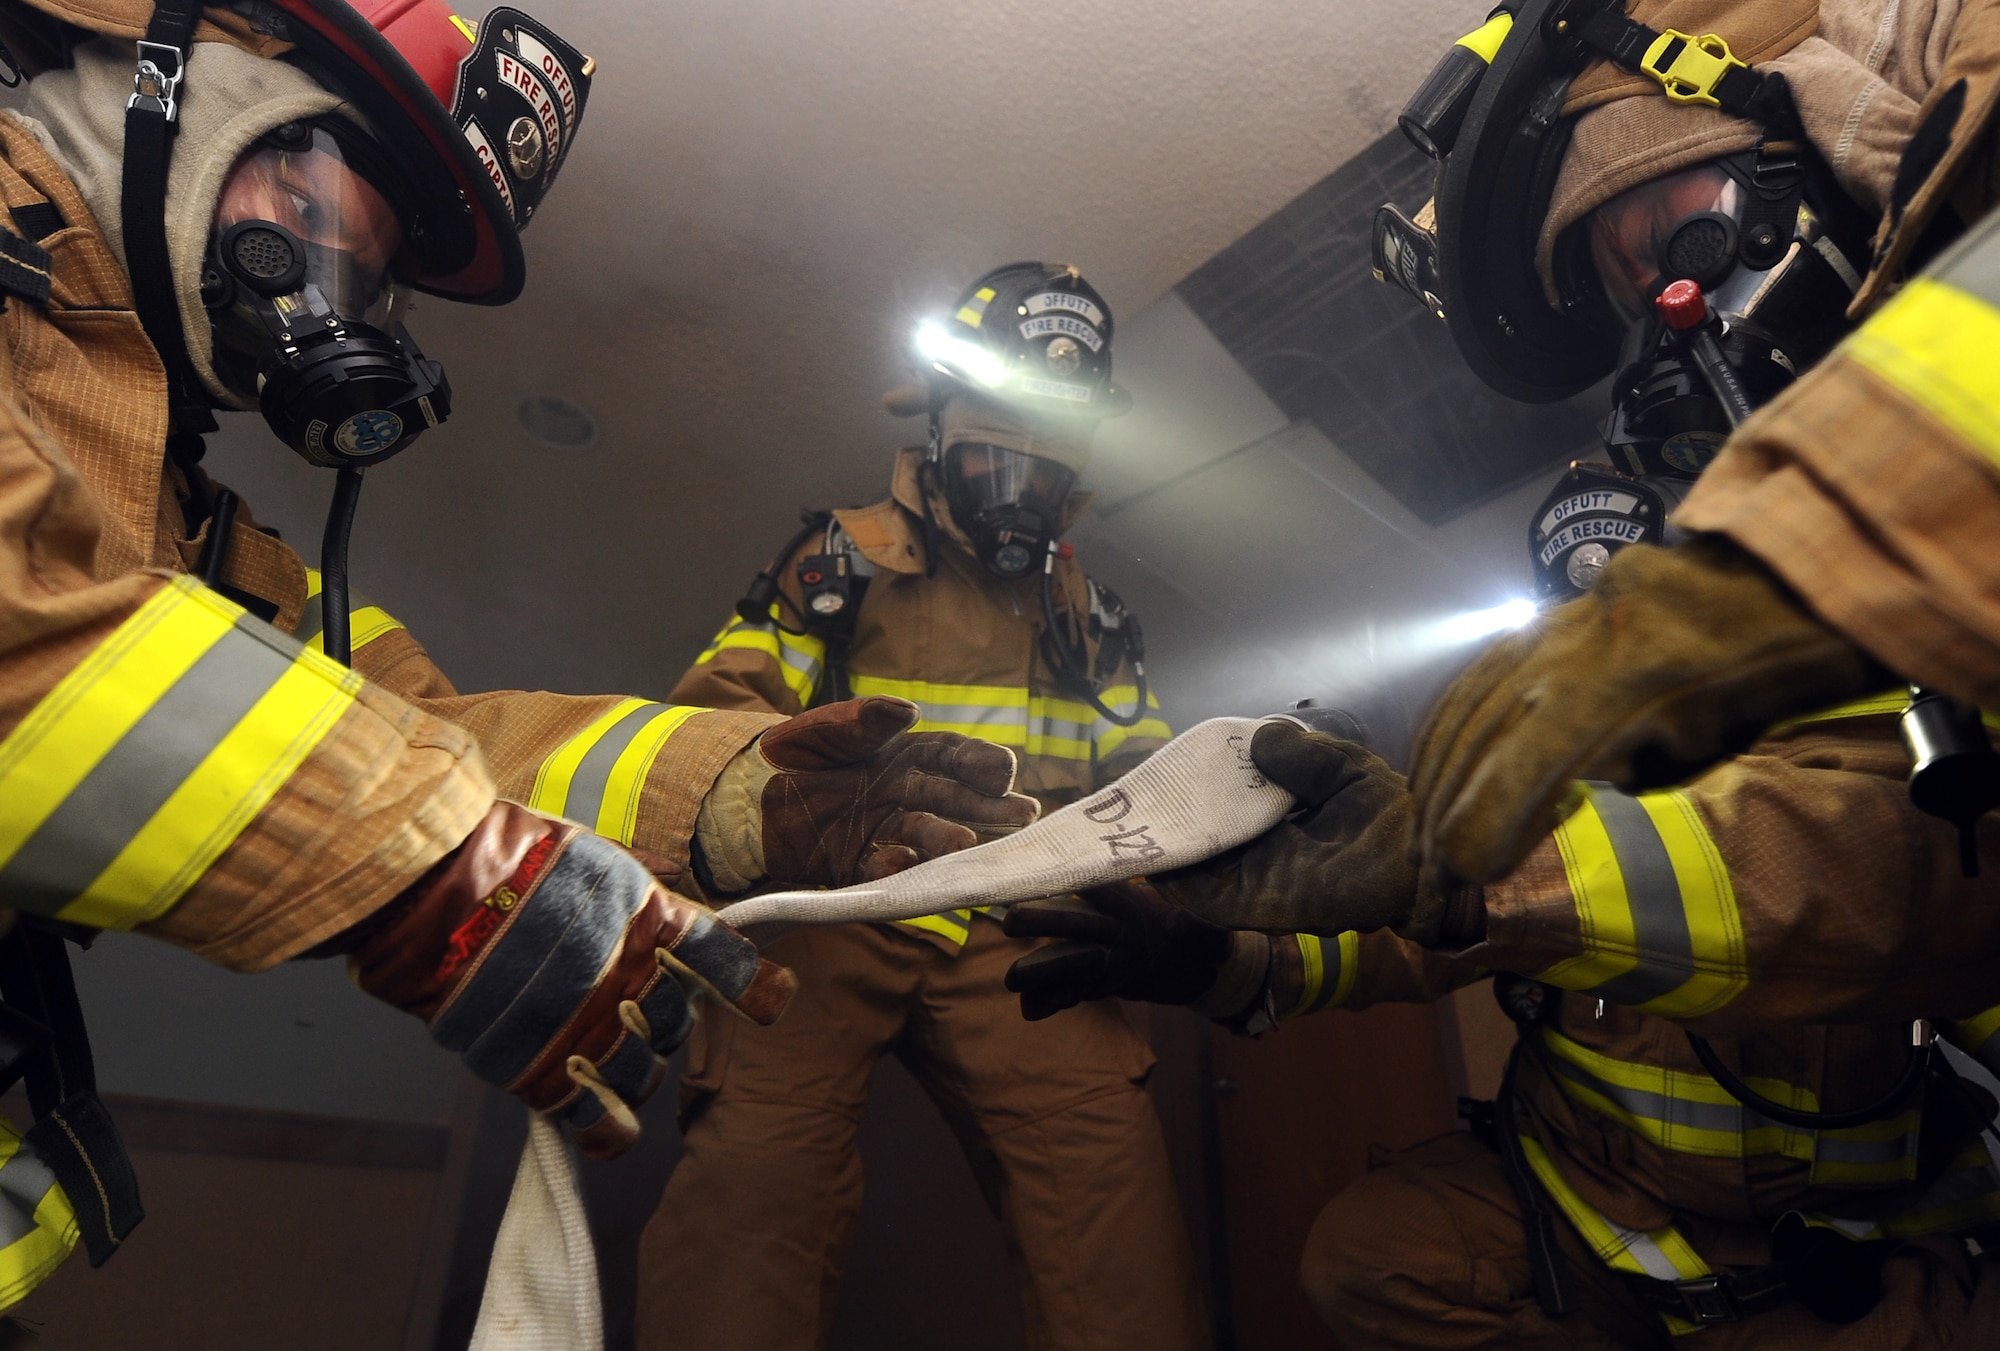 U.S. Air Force Brig. Gen. Donald Bacon (middle), 55th Wing commander, watches as firefighters prepare the hose as smoke quickly descends on them from the ceiling as part of a training exercise located in McCoy Hall at Offutt Air Force Base, Neb., March 7.  The training gave Bacon a front row seat to see the firefighters in action.  (U.S. Air Force photo by Josh Plueger/Released).